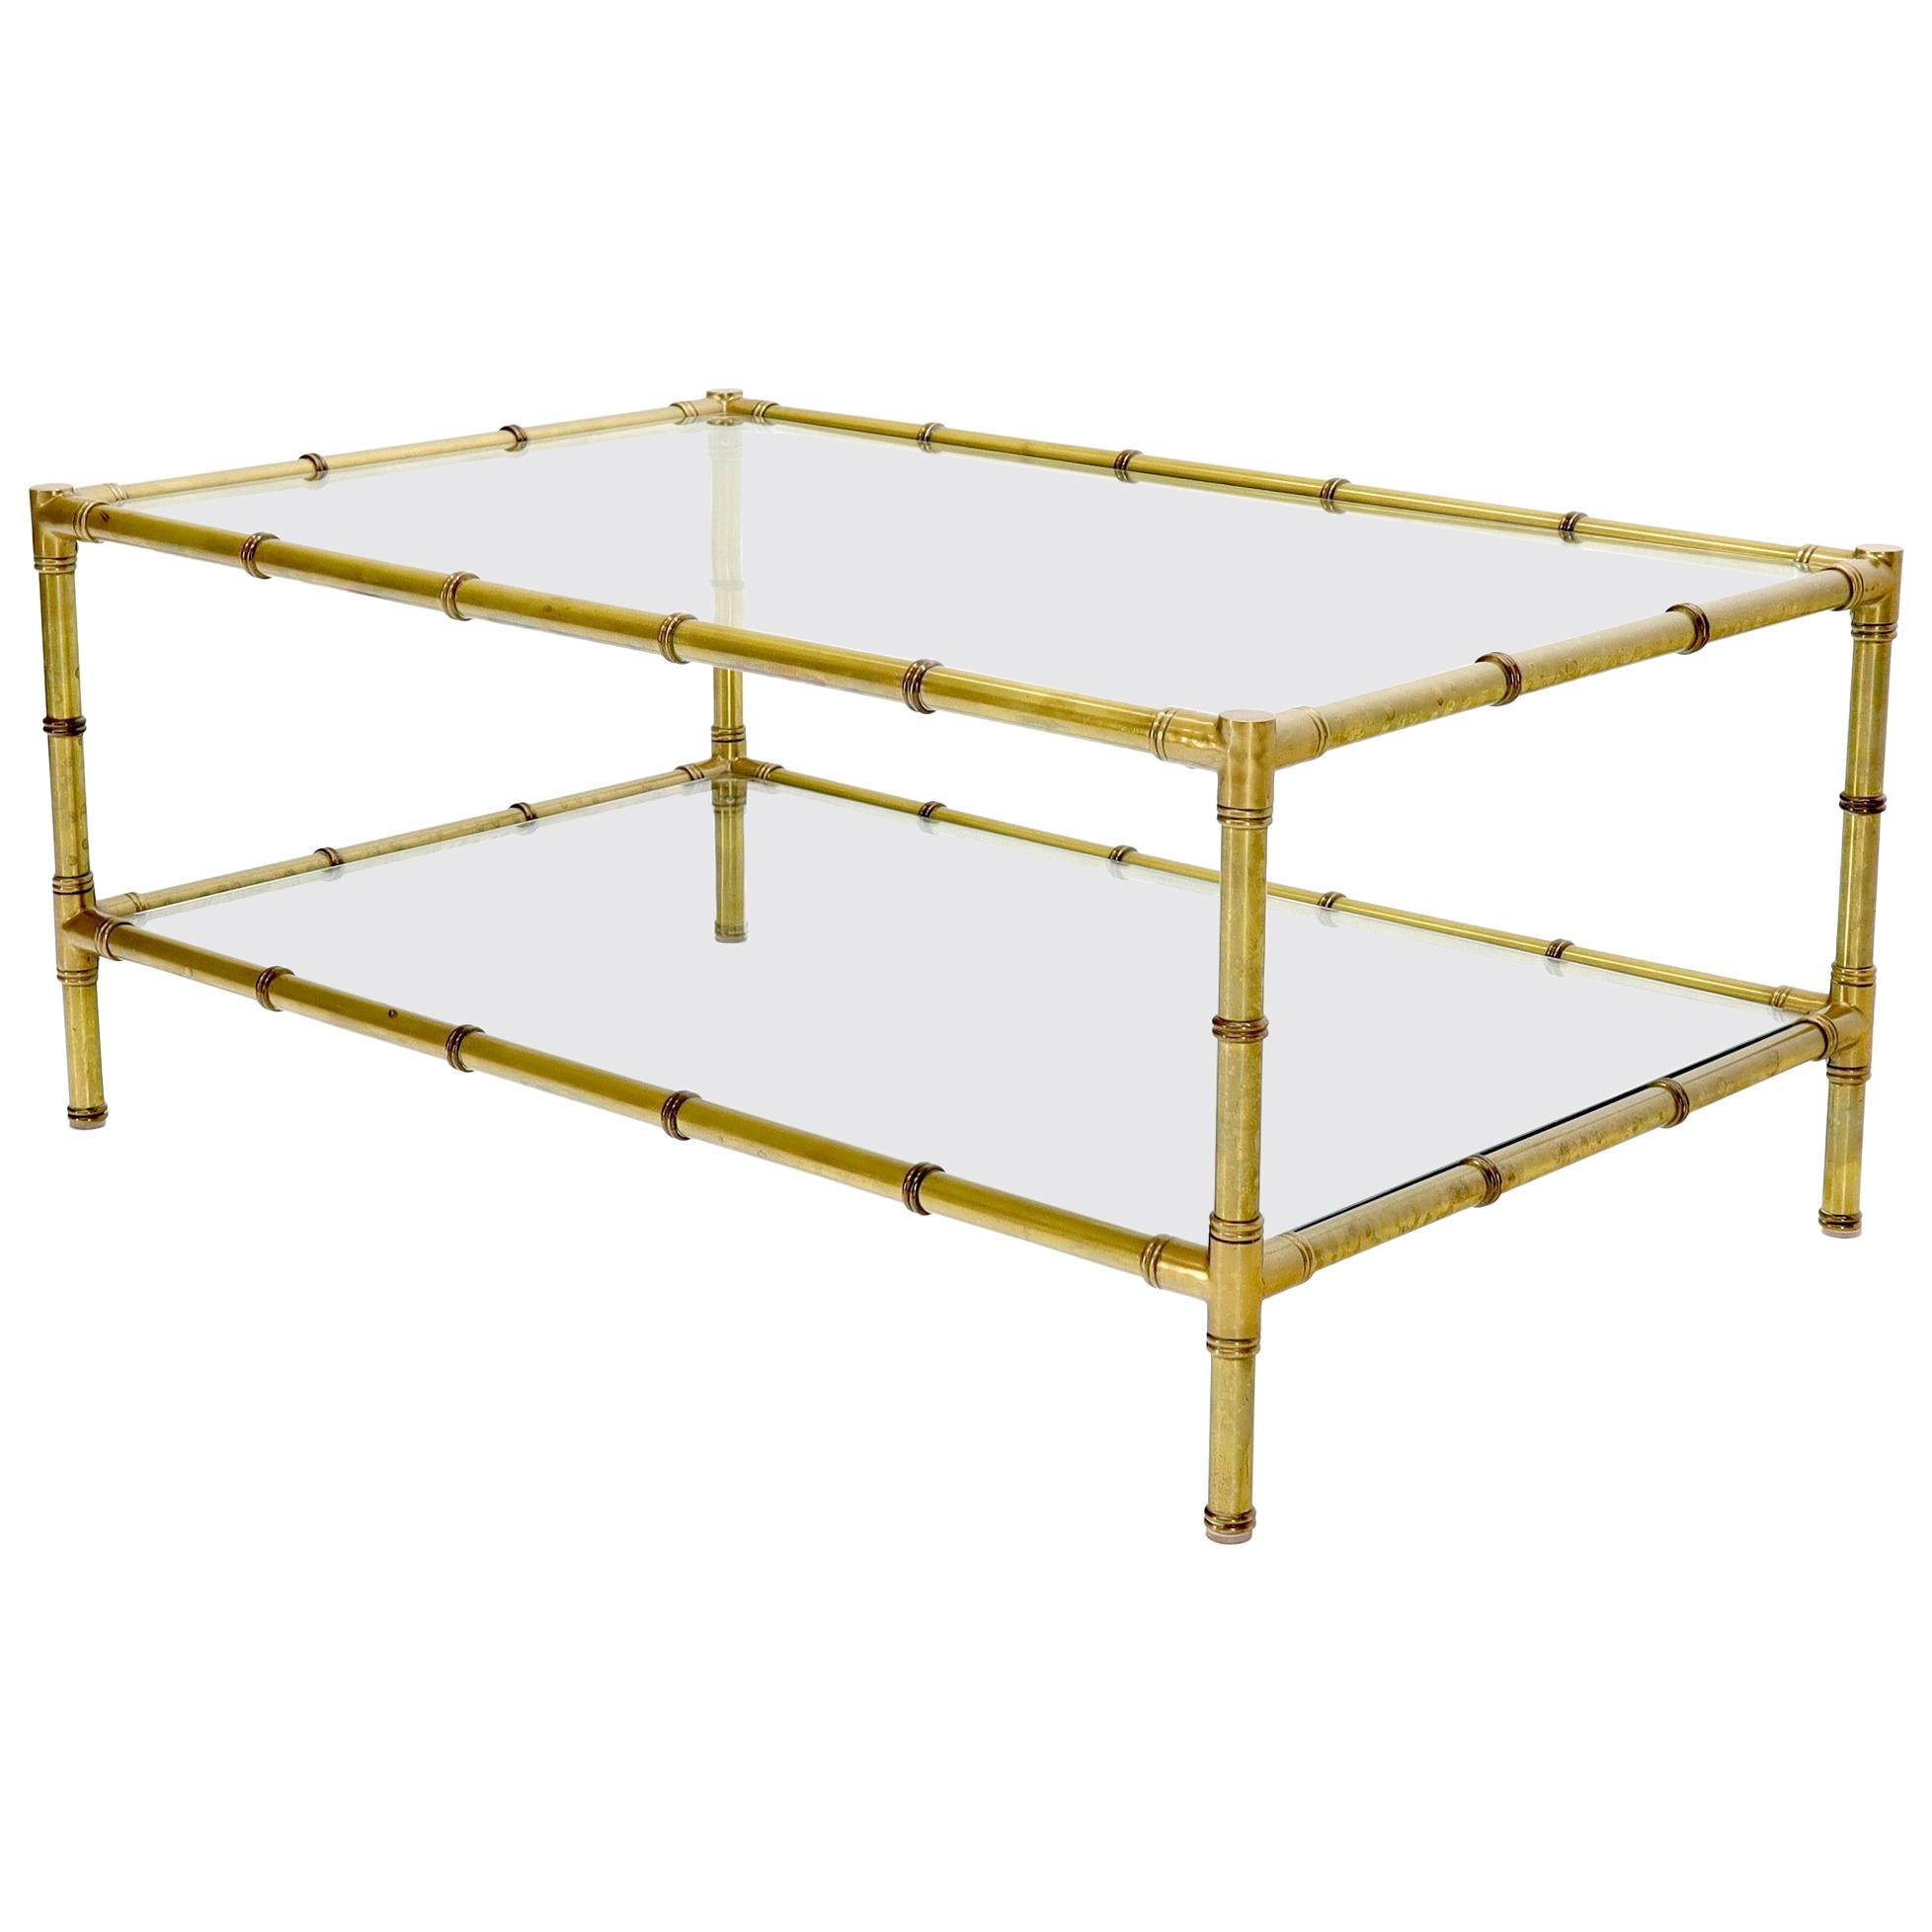 Italian Mid-Century Modern Faux Bamboo Machined Brass Rectangle Two-Tier Coffee